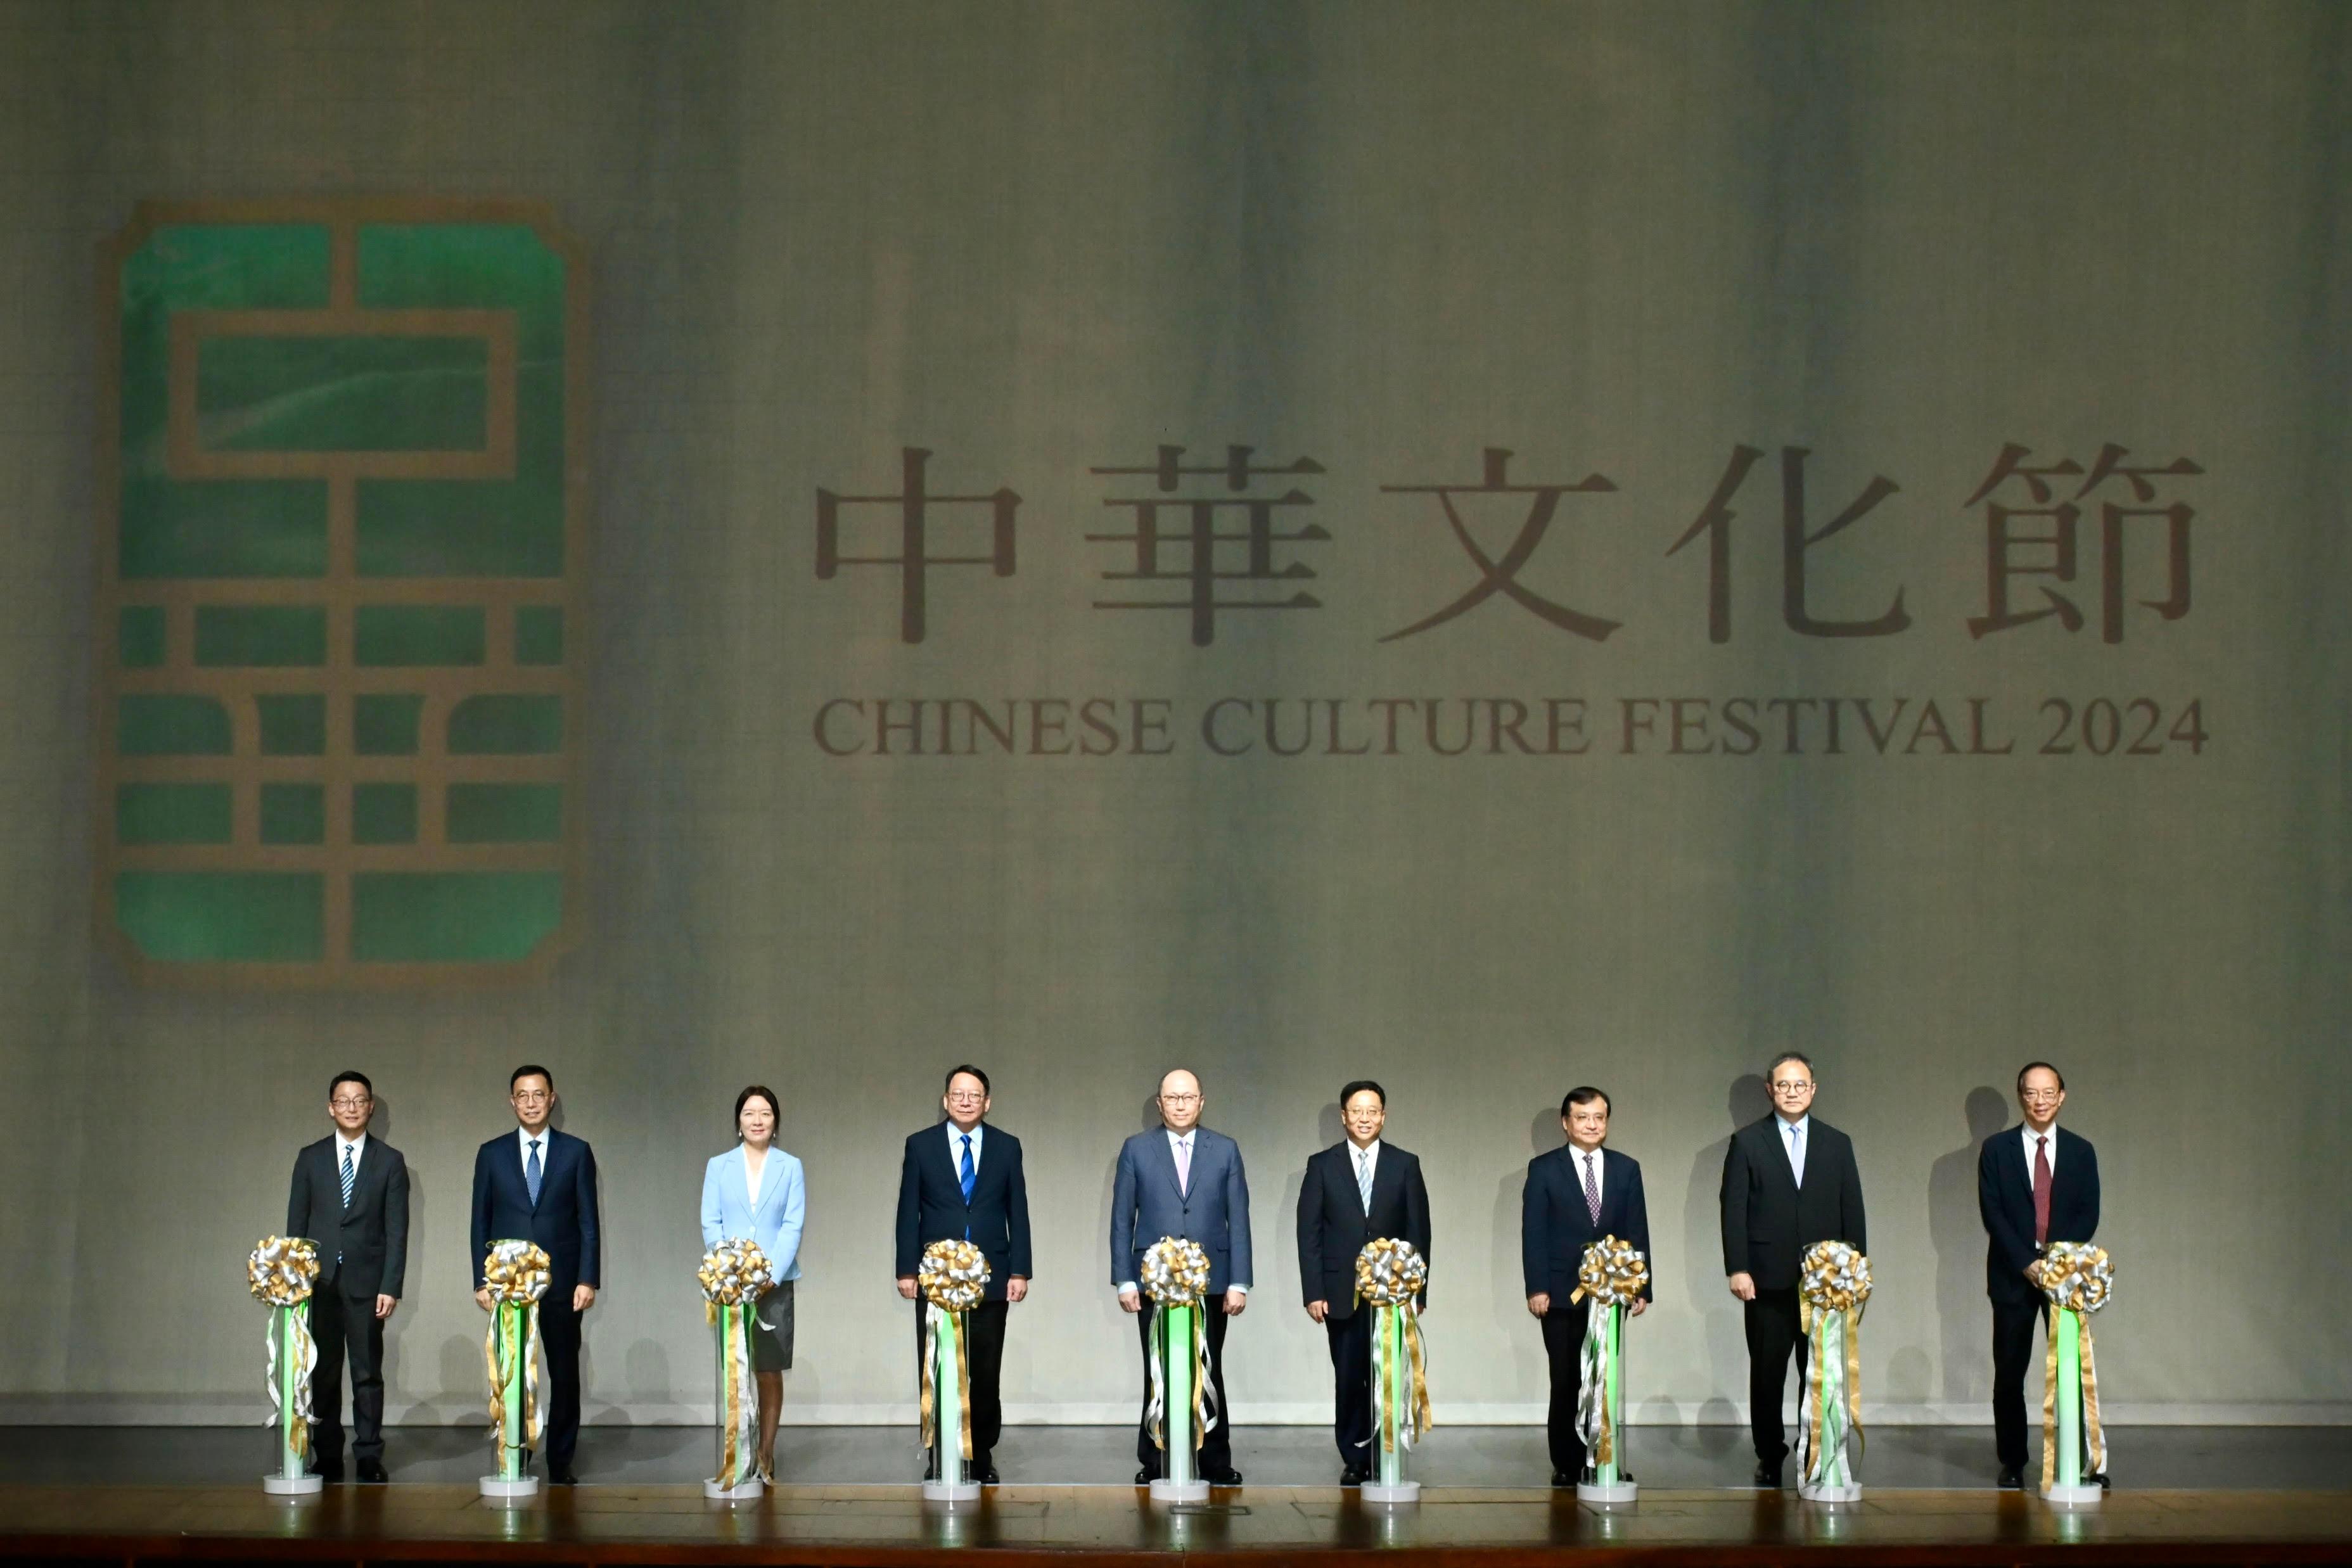 The inaugural Chinese Culture Festival, presented by the Culture, Sports and Tourism Bureau and organised by the Leisure and Cultural Services Department's Chinese Culture Promotion Office, kicked off today (June 7) at the Auditorium of the Sha Tin Town Hall. Photo shows the officiating guests including the Director of the Liaison Office of the Central People's Government (LOCPG) in the Hong Kong Special Administrative Region (HKSAR), Mr Zheng Yanxiong (centre); the Chief Secretary for Administration, Mr Chan Kwok-ki (fourth left); the Commissioner of the Ministry of Foreign Affairs of the People's Republic of China in the HKSAR, Mr Cui Jianchun (fourth right); Deputy Director of the LOCPG in the HKSAR Ms Lu Xinning (third left); Deputy Commissioner of the Office of the Commissioner of the Ministry of Foreign Affairs of the People's Republic of China in the HKSAR Mr Fang Jianming (third right); the Secretary for Culture, Sports and Tourism, Mr Kevin Yeung (second left); the Permanent Secretary for Culture, Sports and Tourism, Mr Joe Wong (second right); the Director of Leisure and Cultural Services, Mr Vincent Liu (first left); and the Chairman of the Legislative Council Panel on Home Affairs, Culture and Sports, Mr Ma Fung-kwok (first right).